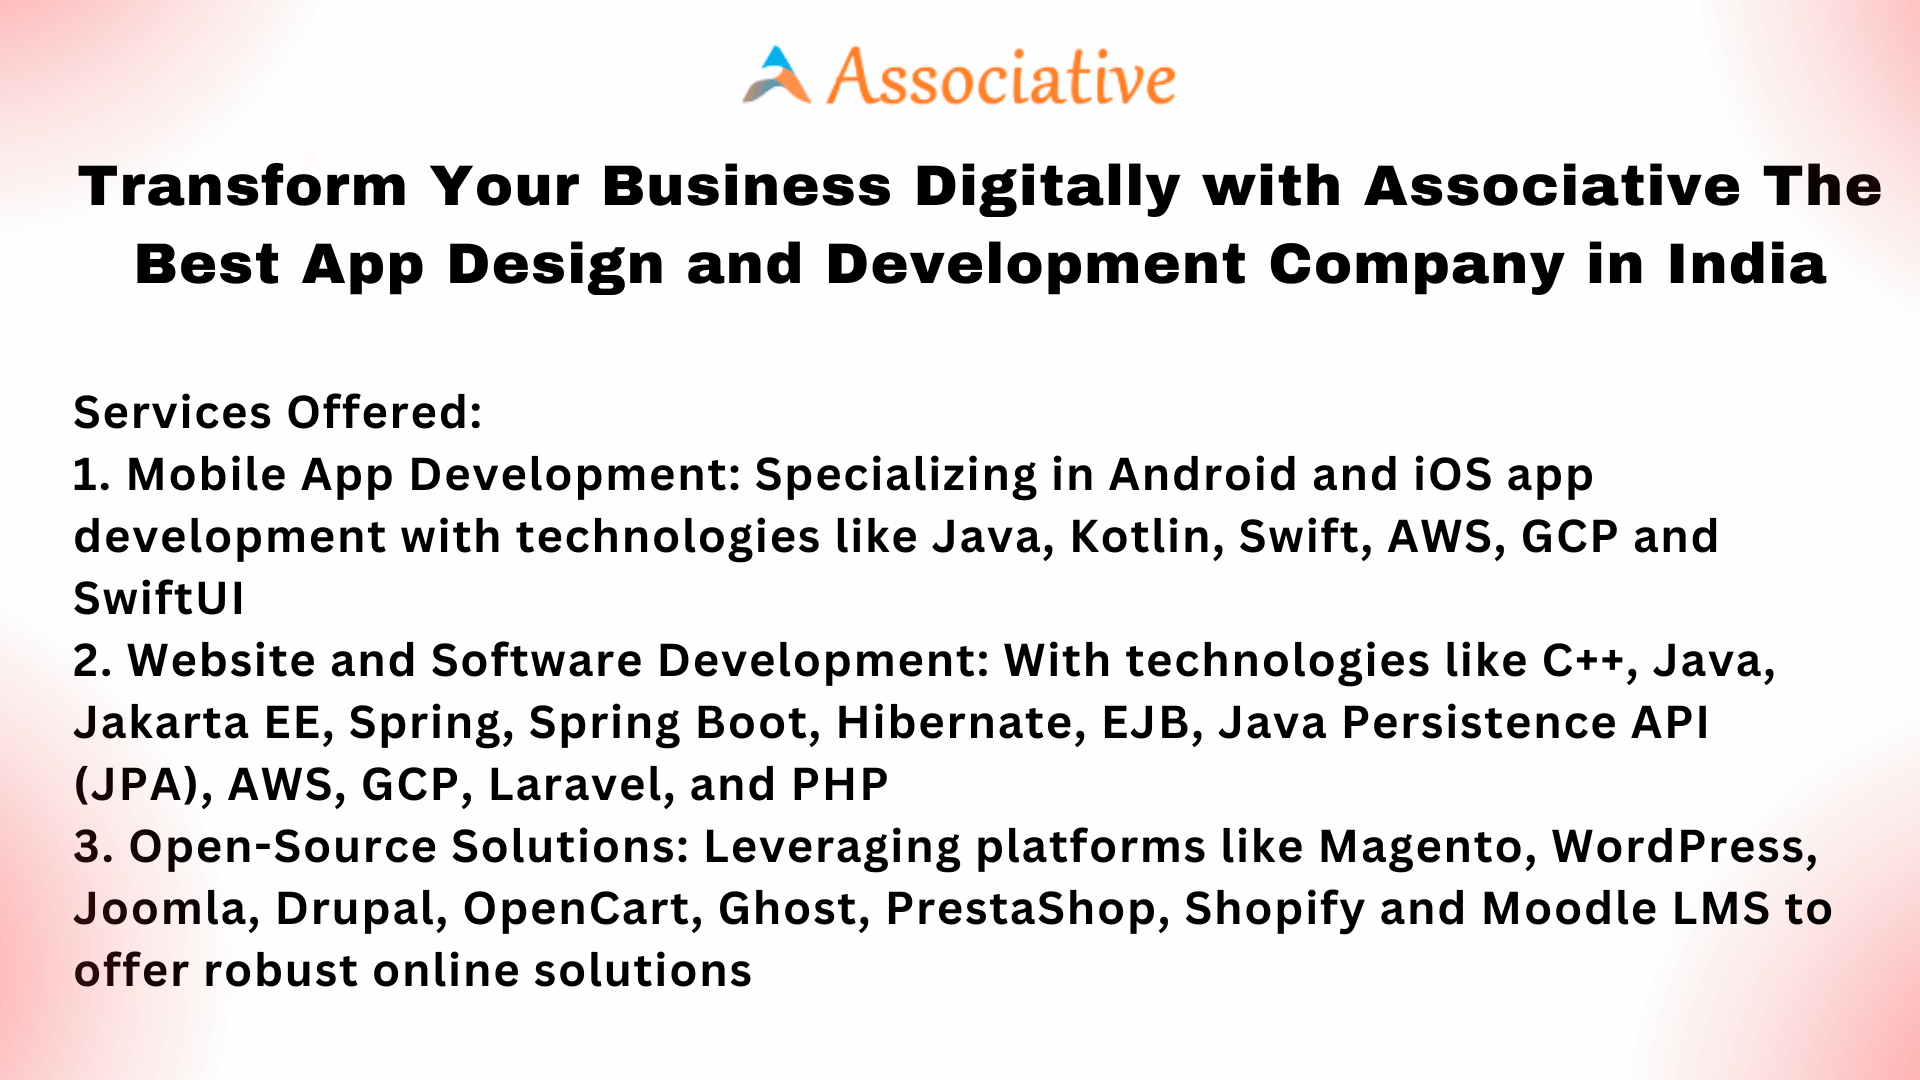 Transform Your Business Digitally with Associative The Best App Design and Development Company in India